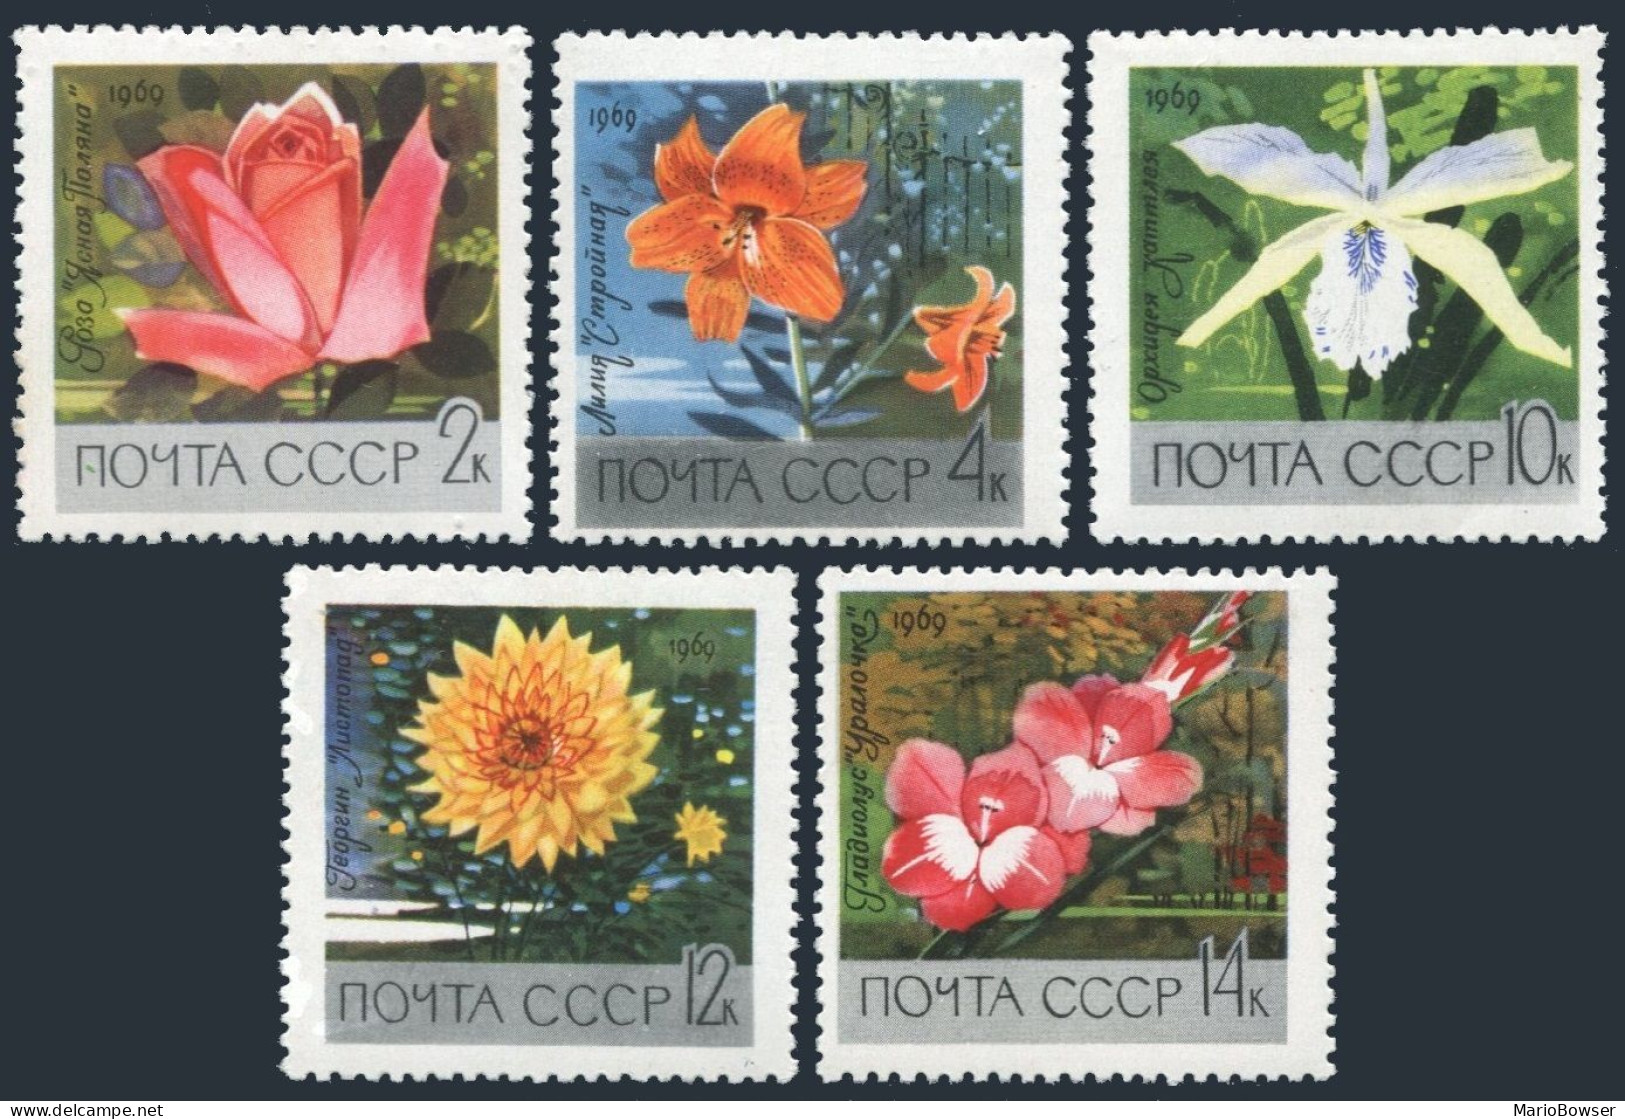 Russia 3596-3600, MNH. Mi 3620-3624. Botanical Gardens, 1969. Flowers. Orchid. - Unused Stamps